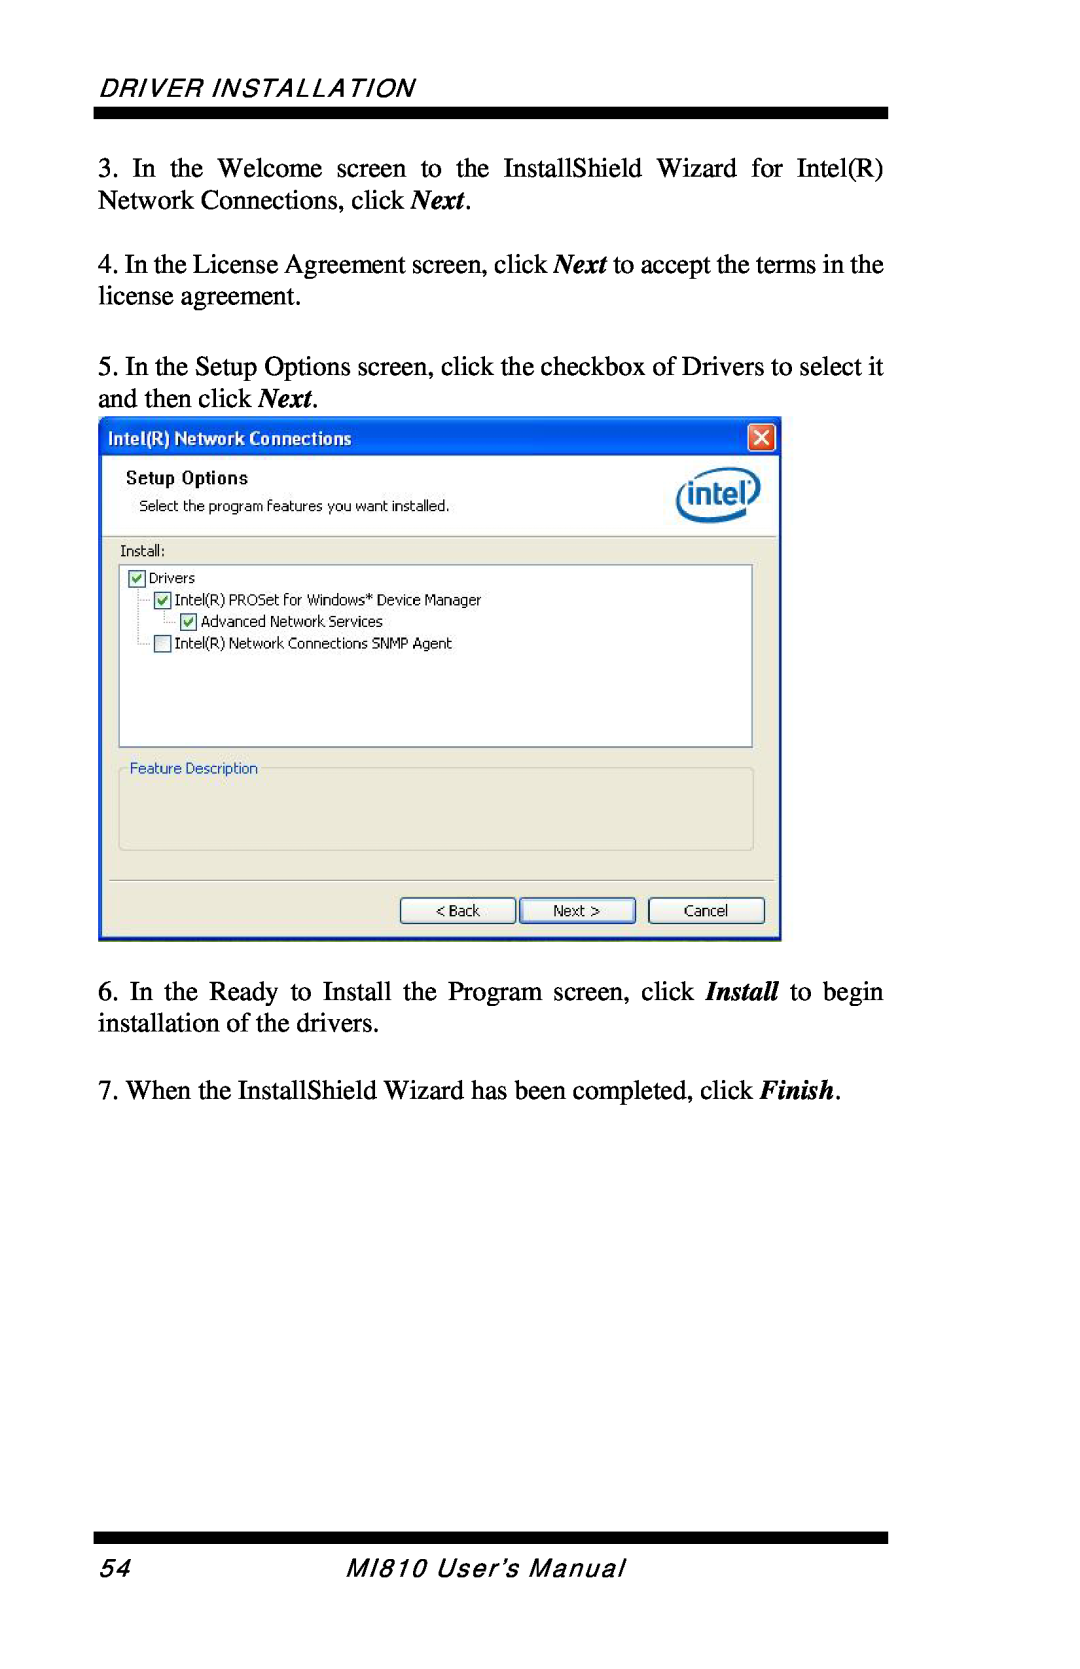 Intel MI810 user manual When the InstallShield Wizard has been completed, click Finish 